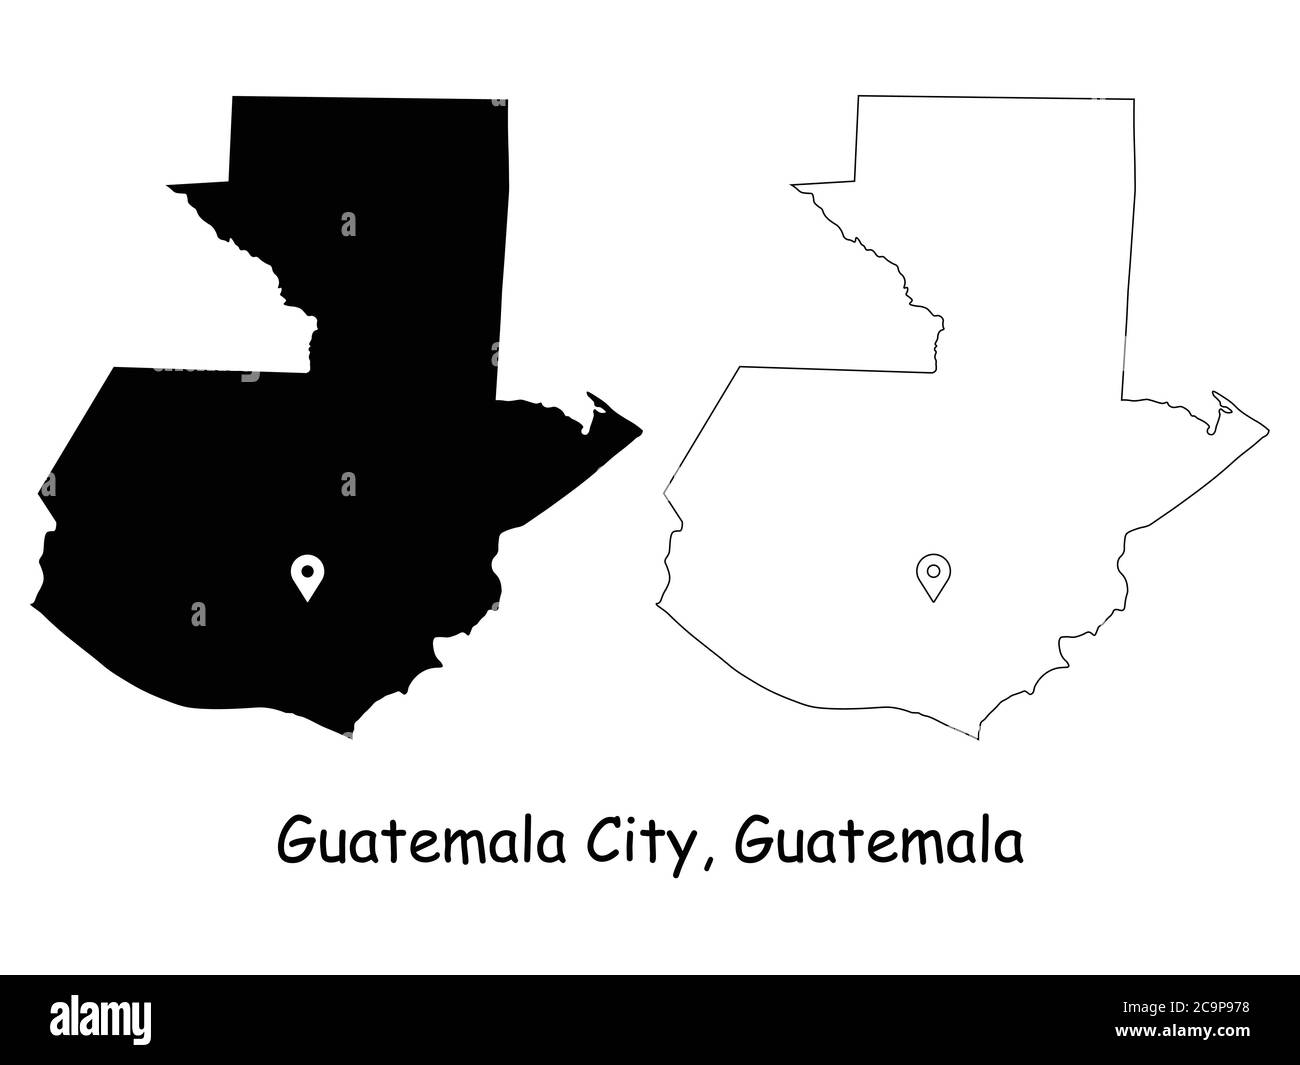 Guatemala City Guatemala. Detailed Country Map with Location Pin on Capital City. Black silhouette and outline maps isolated on white background. EPS Stock Vector